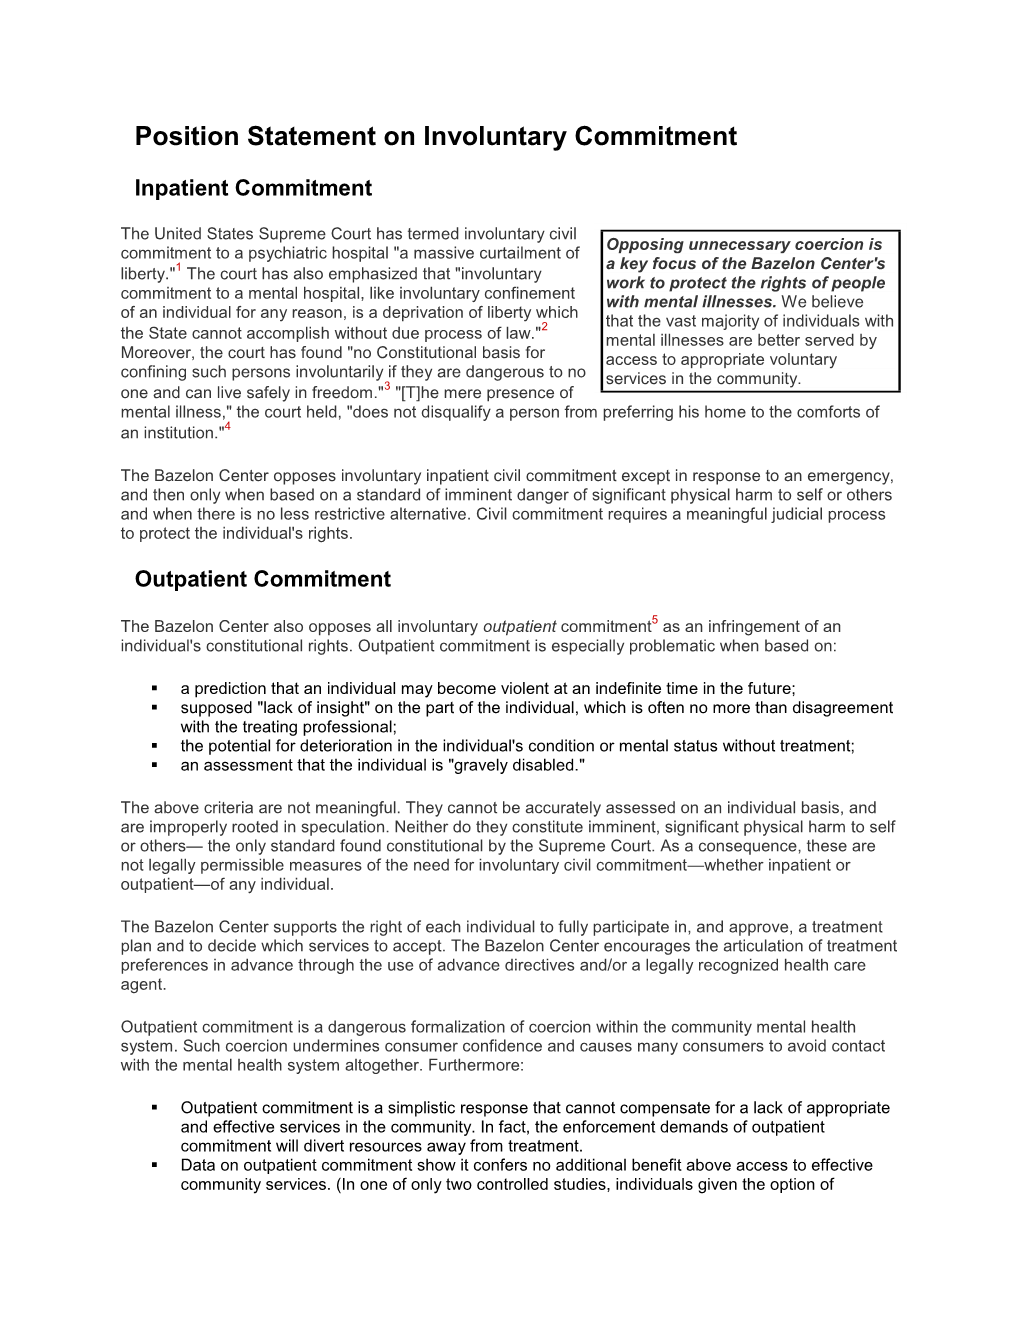 Position Statement on Involuntary Commitment